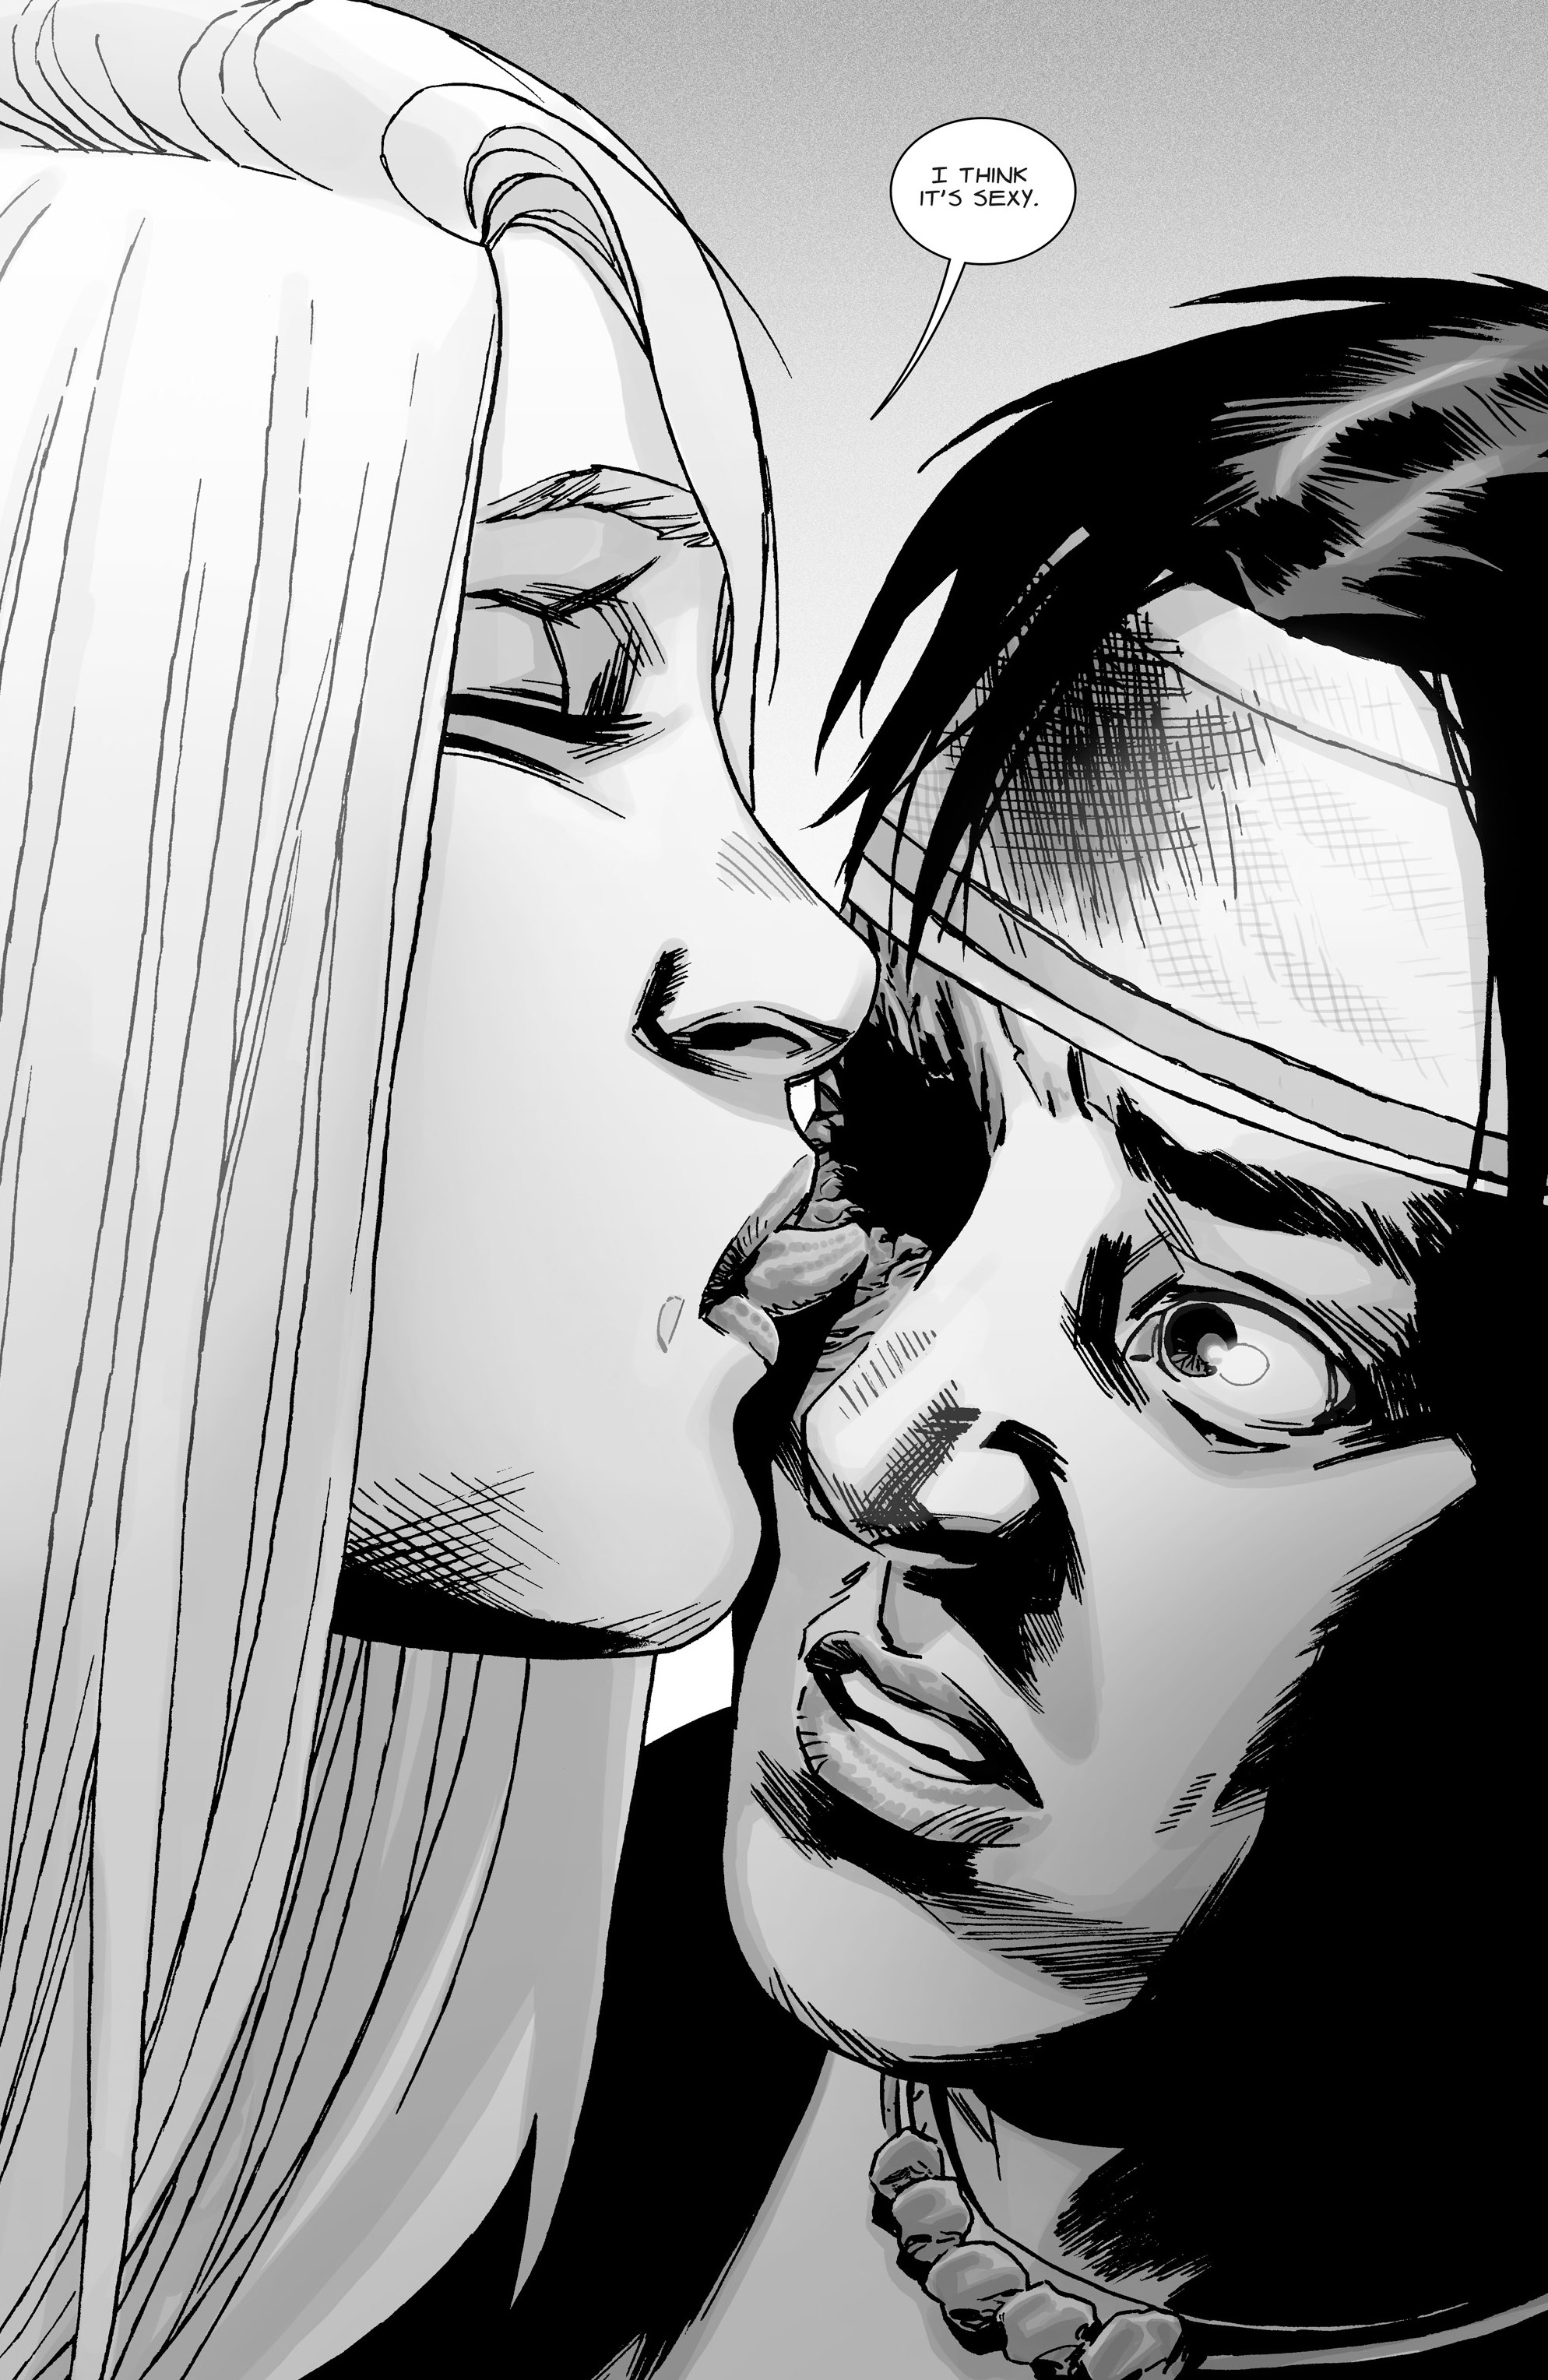 The Walking Dead Comics Will Stress You Out Way More